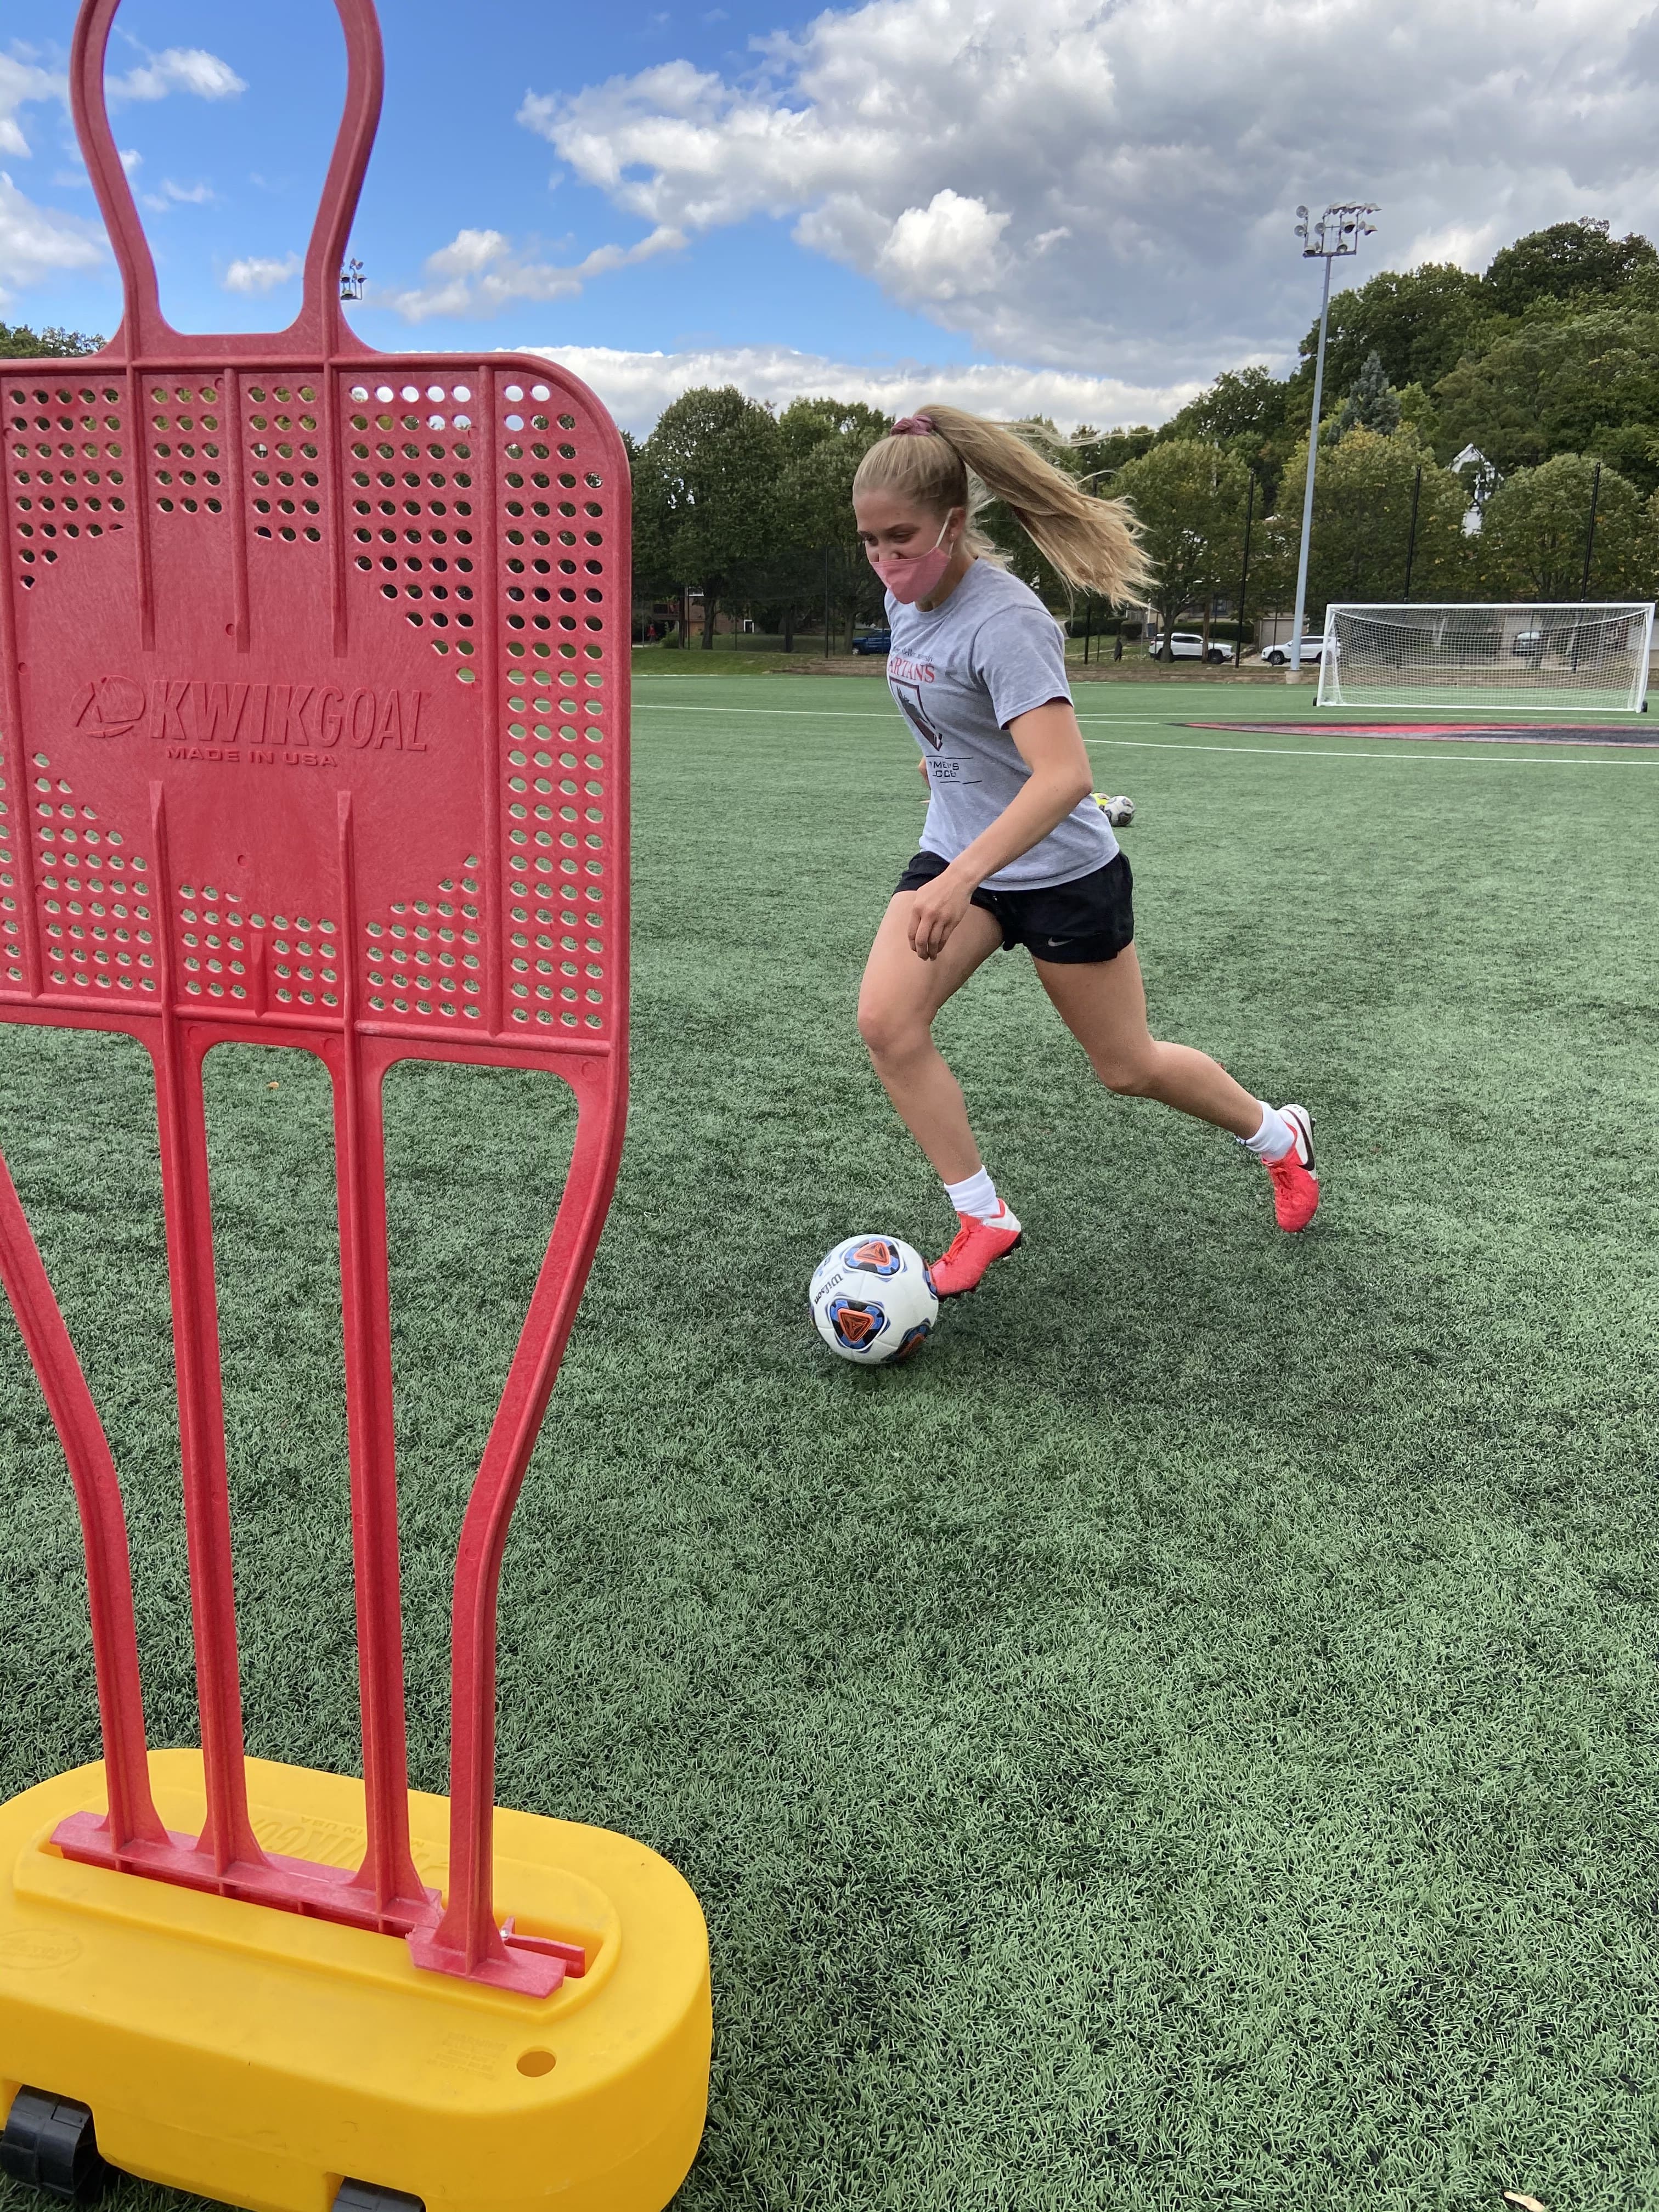 first-year soccer player Sarah Scoles approaches a red metal obstacle on the soccer field